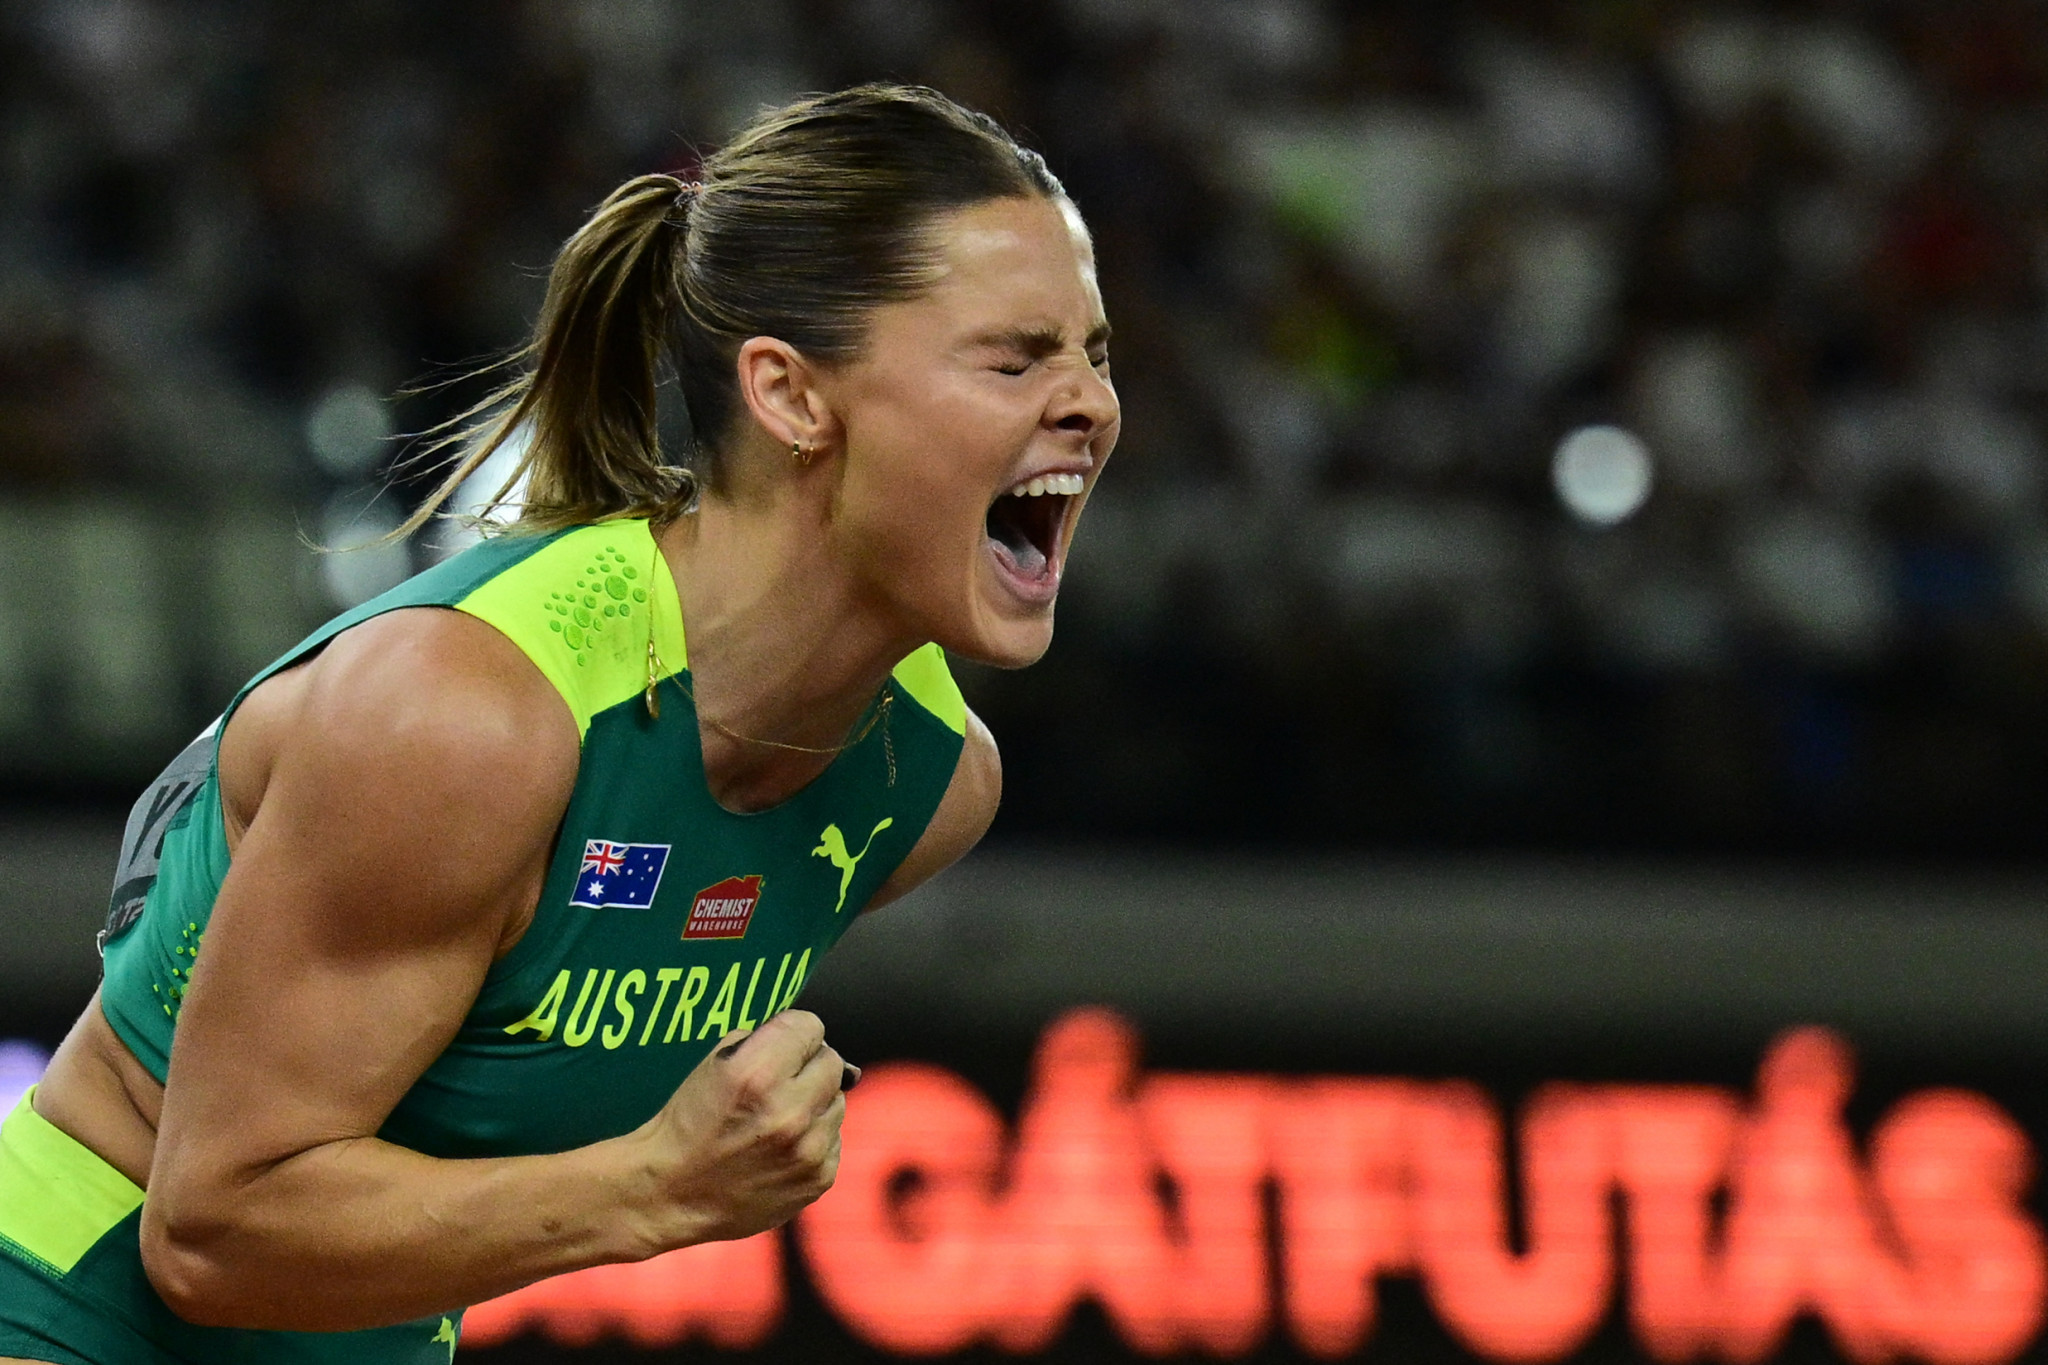 Australia's Nina Kennedy celebrated a first title at the World Athletics Championships in the women's pole vault ©Getty Images